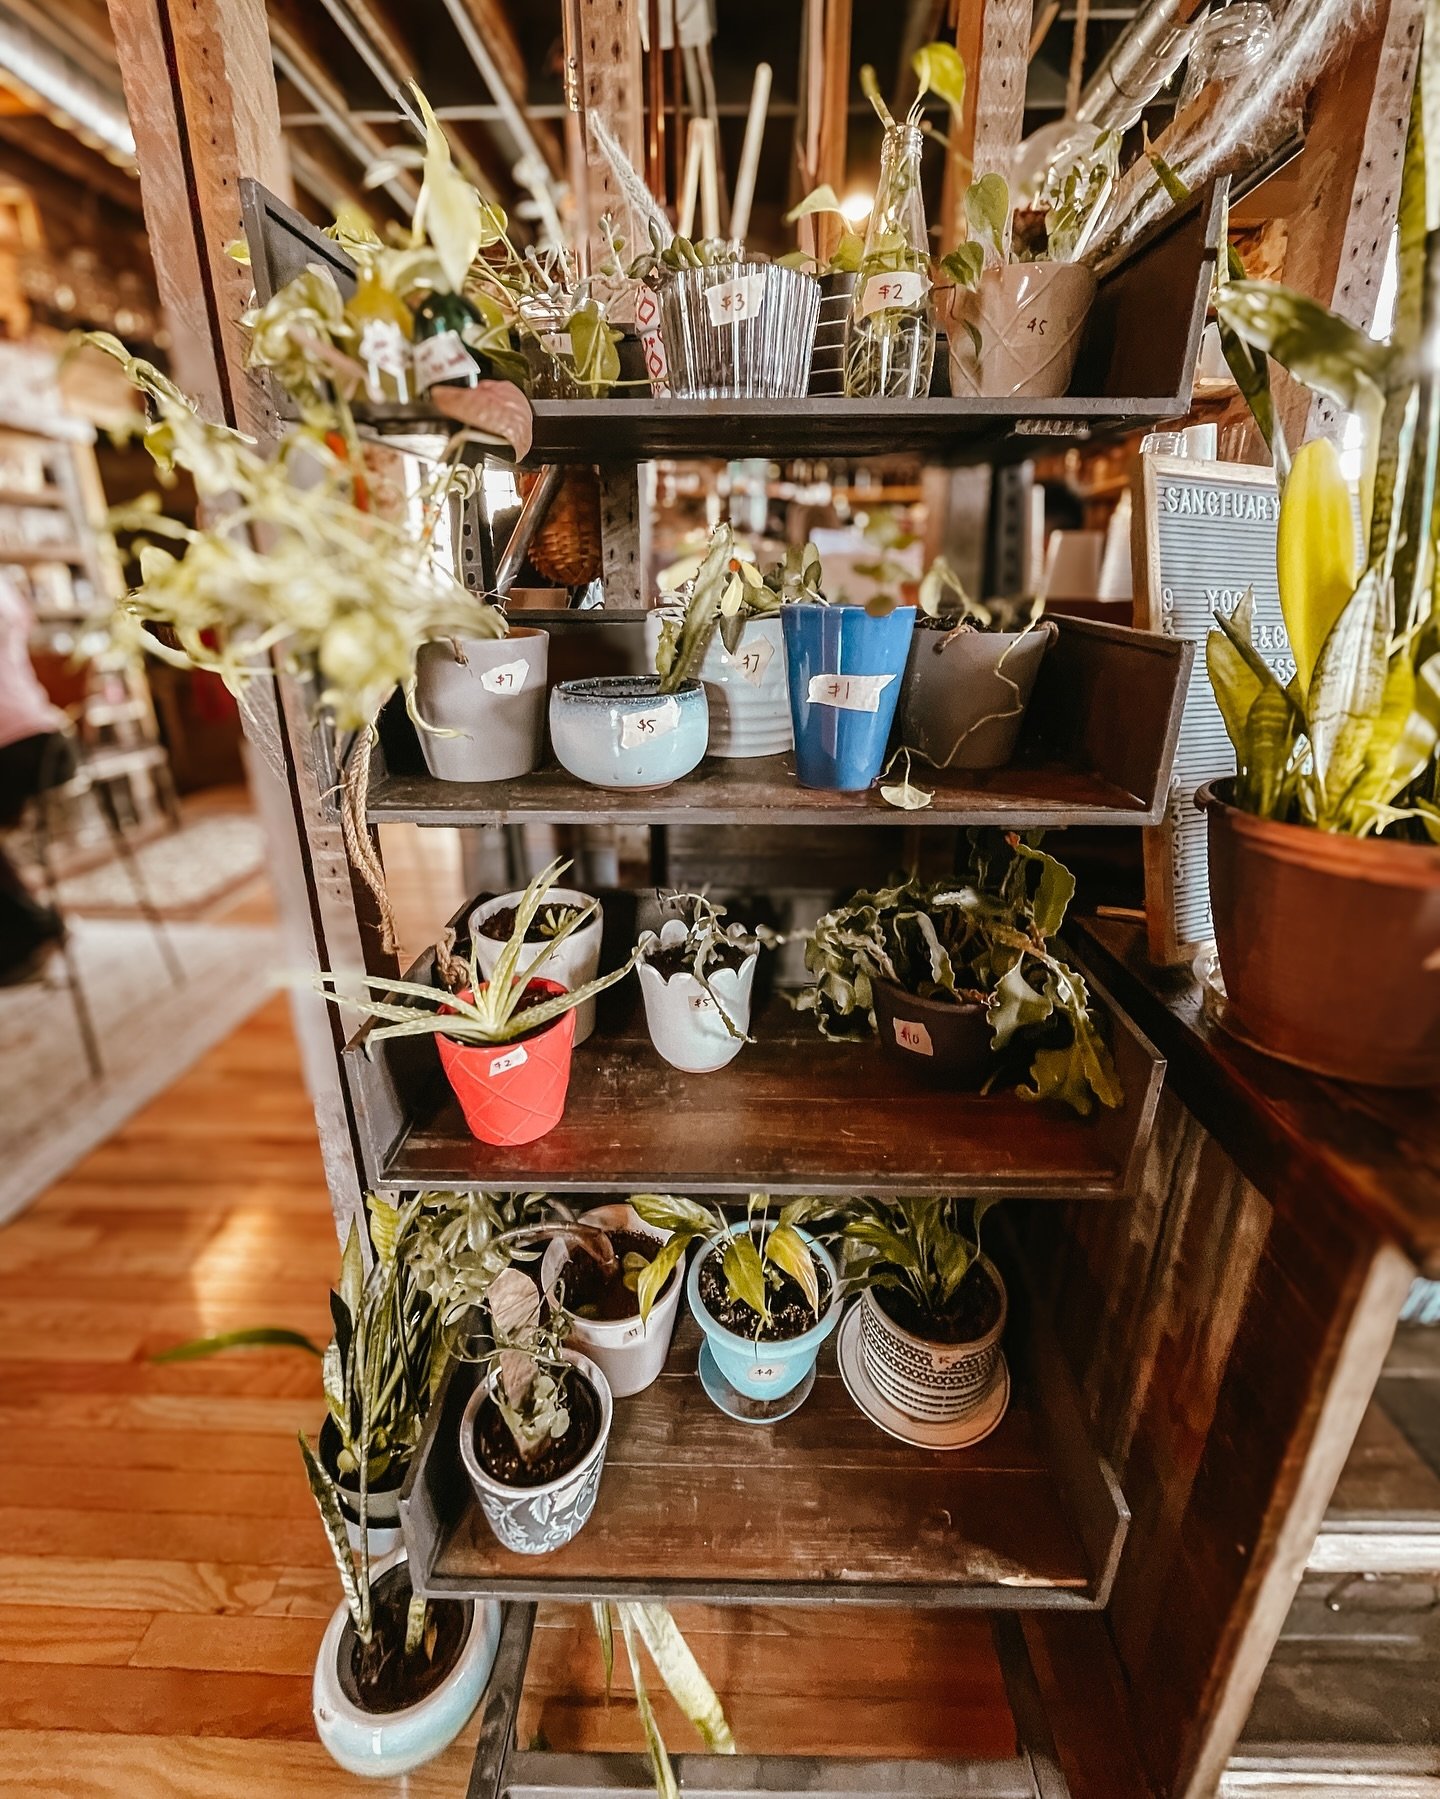 Happy Friday friends!

We&rsquo;ve have been doing some spring cleaning around Sanctuary, and are selling some of our plants! These plants have all been grown or propagated at Sanctuary over the past few years, and we are sad to see them go but know 